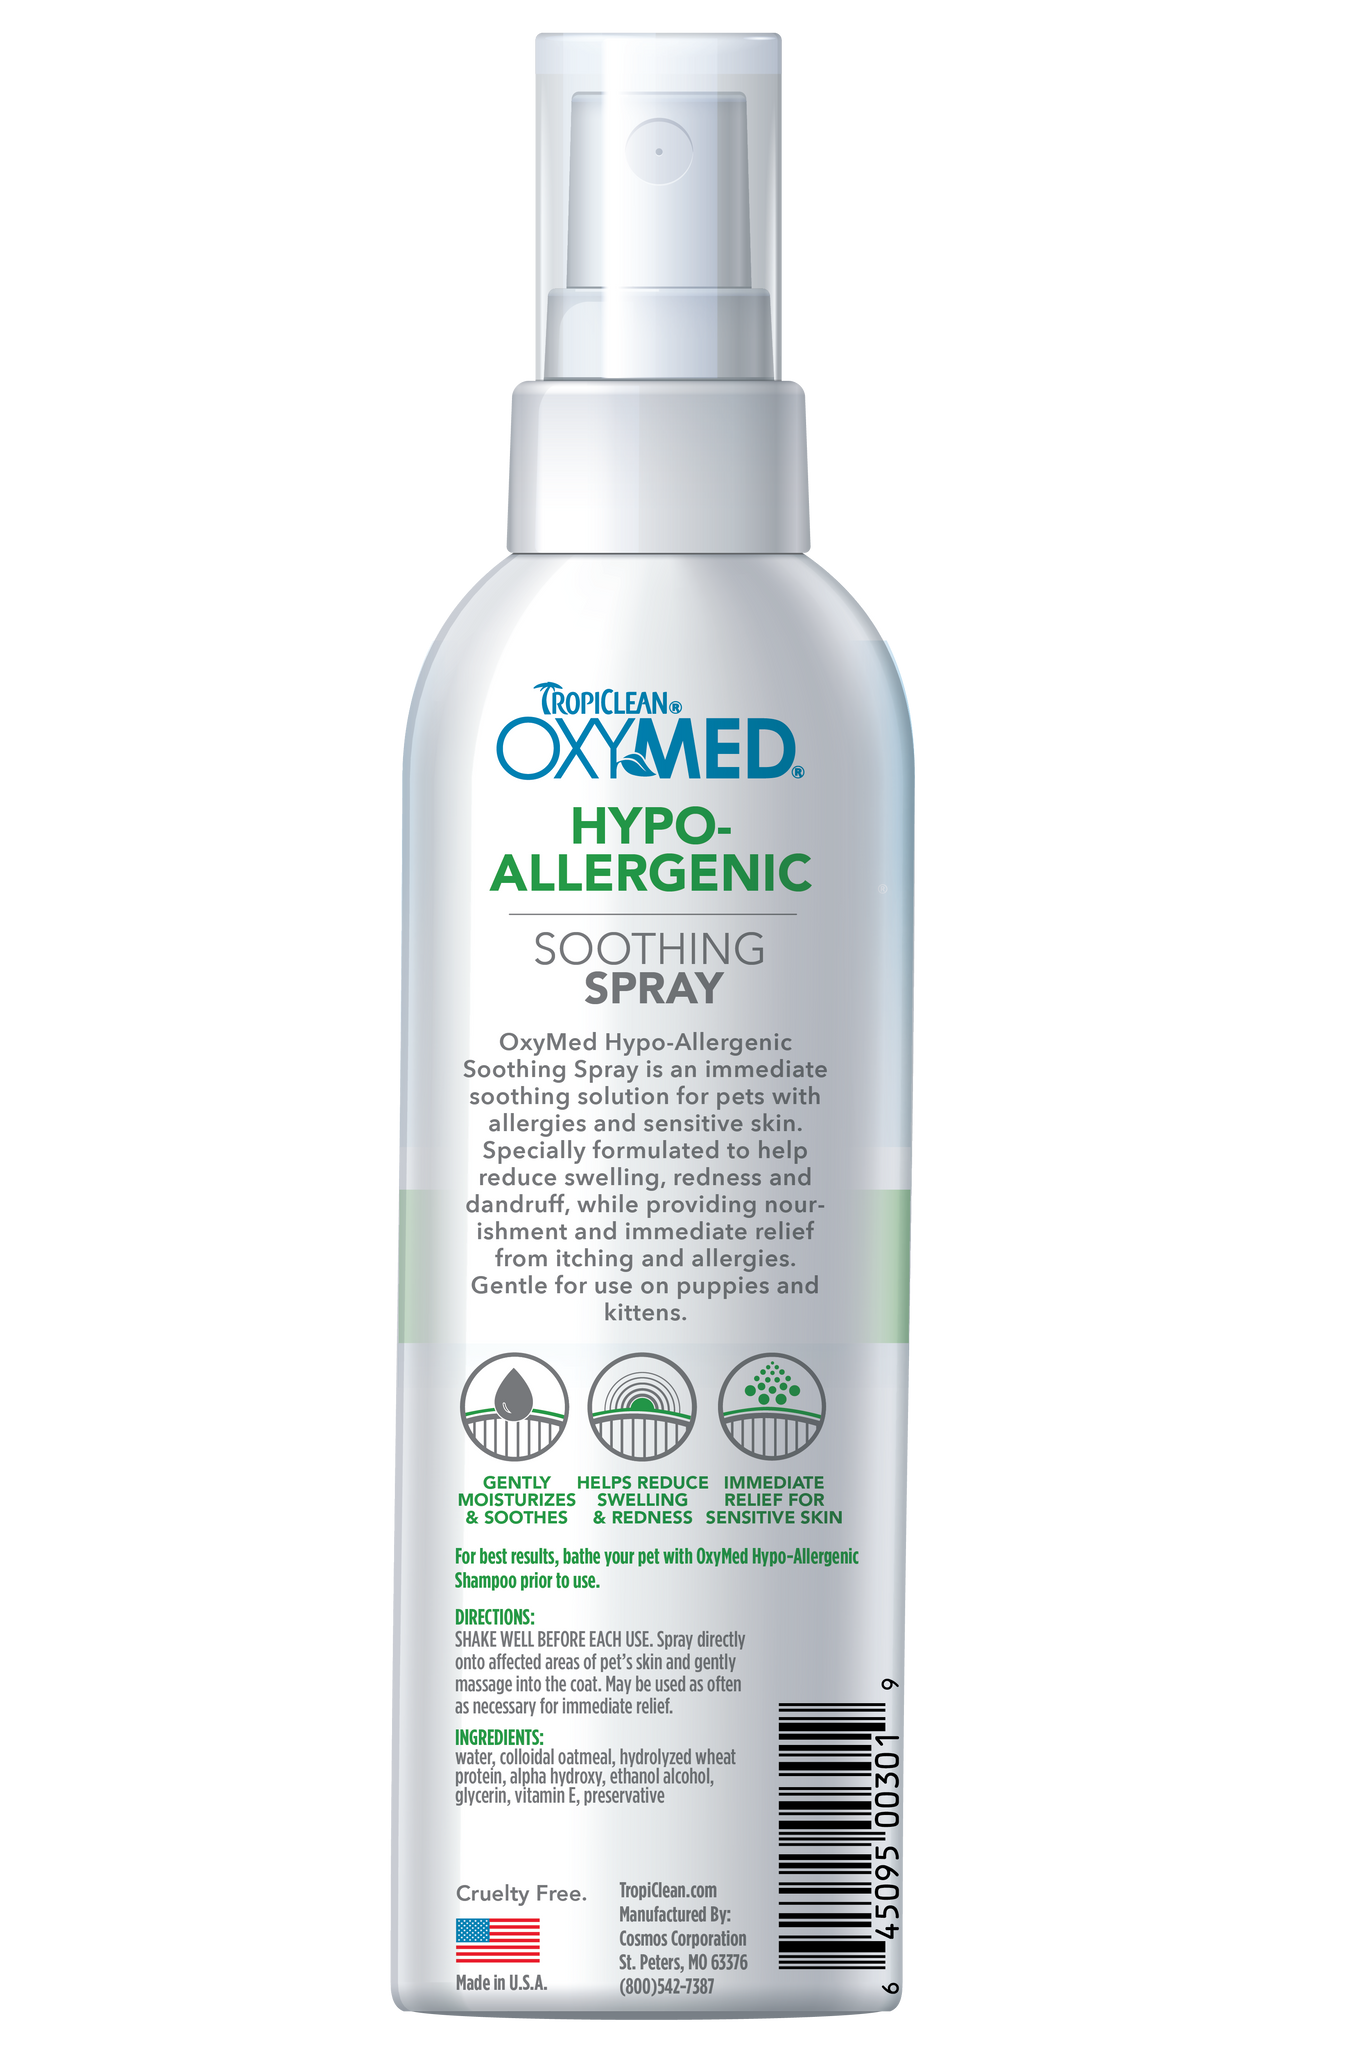 TROPICLEAN OXYMED HYPO-ALLERGENIC SPRAY FOR DOGS AND CATS